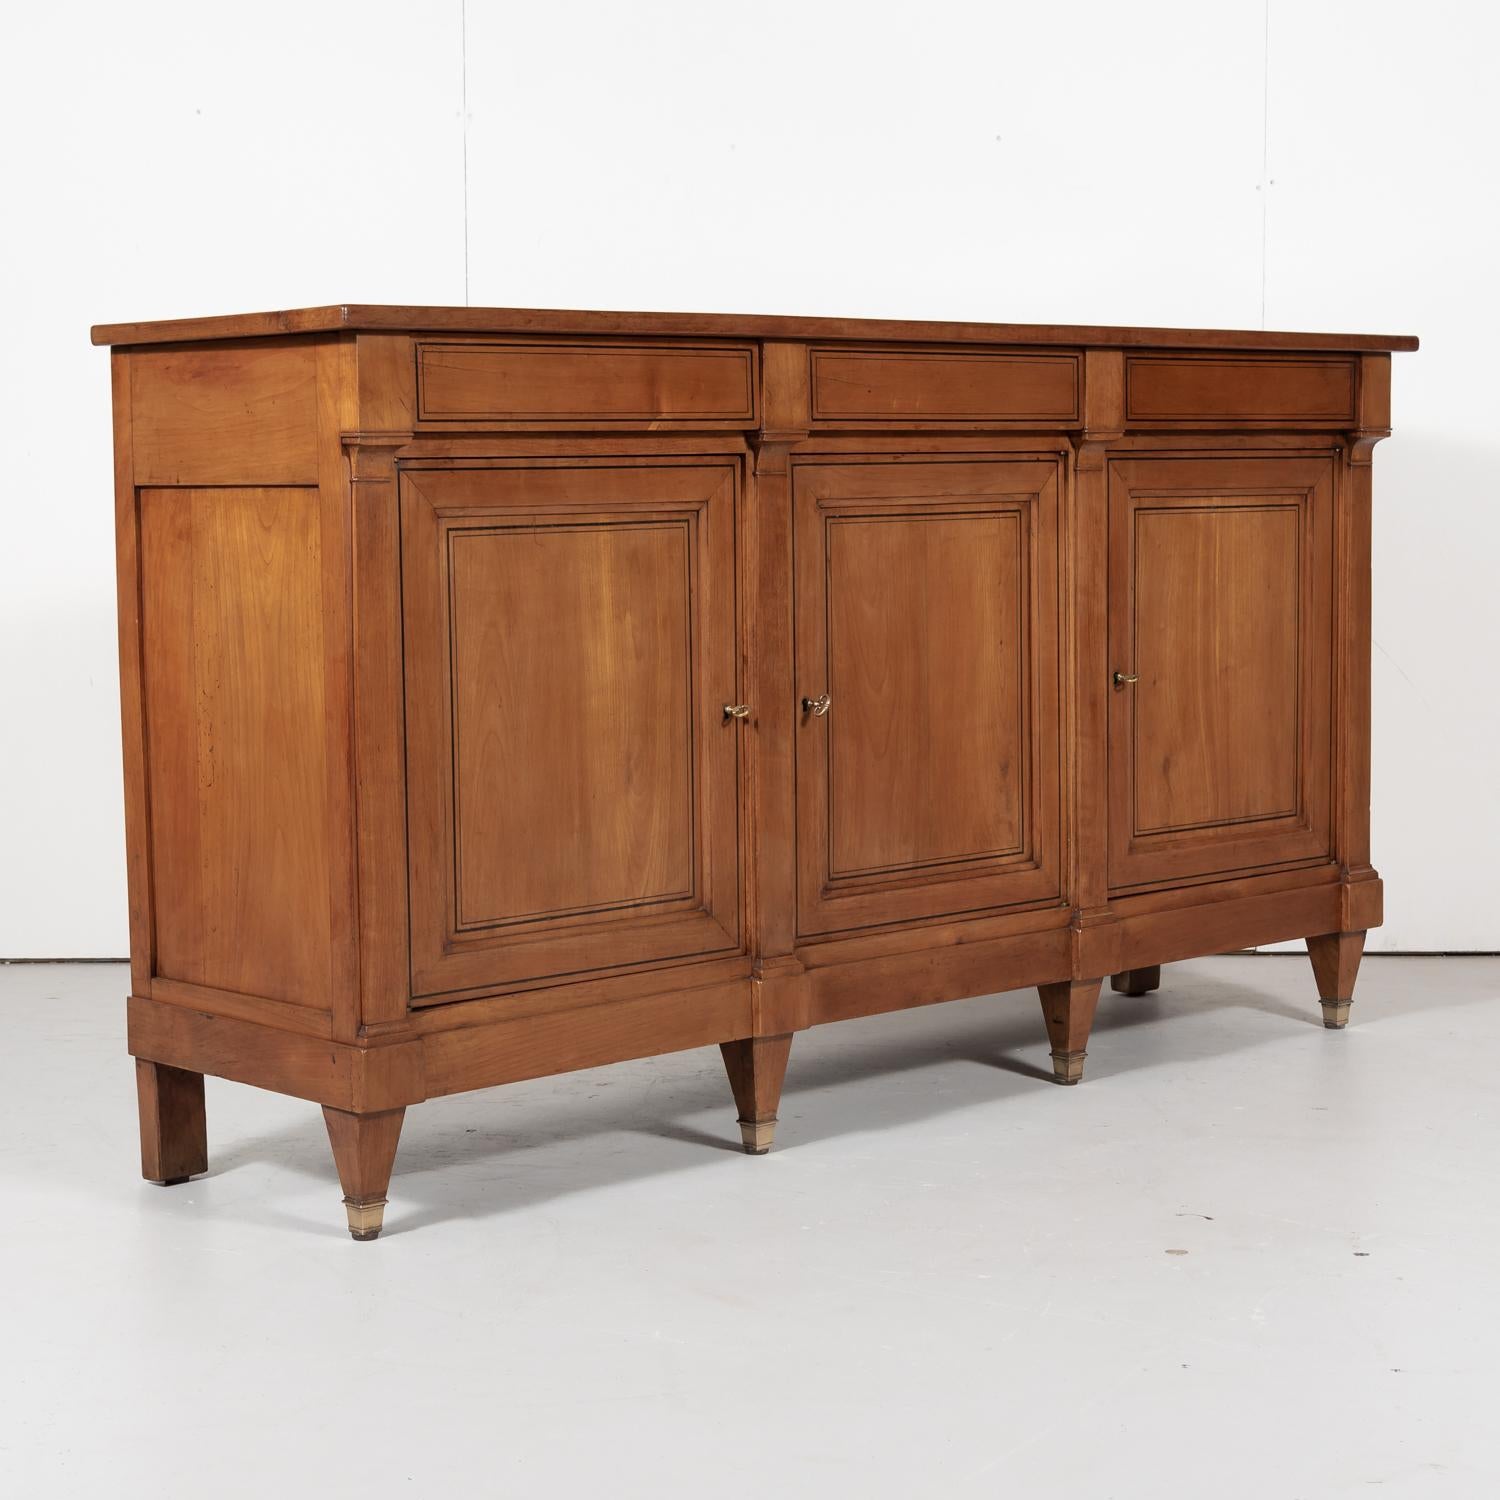 Early 20th Century French Directoire Style Cherry Enfilade Buffet with Ebony Inlay